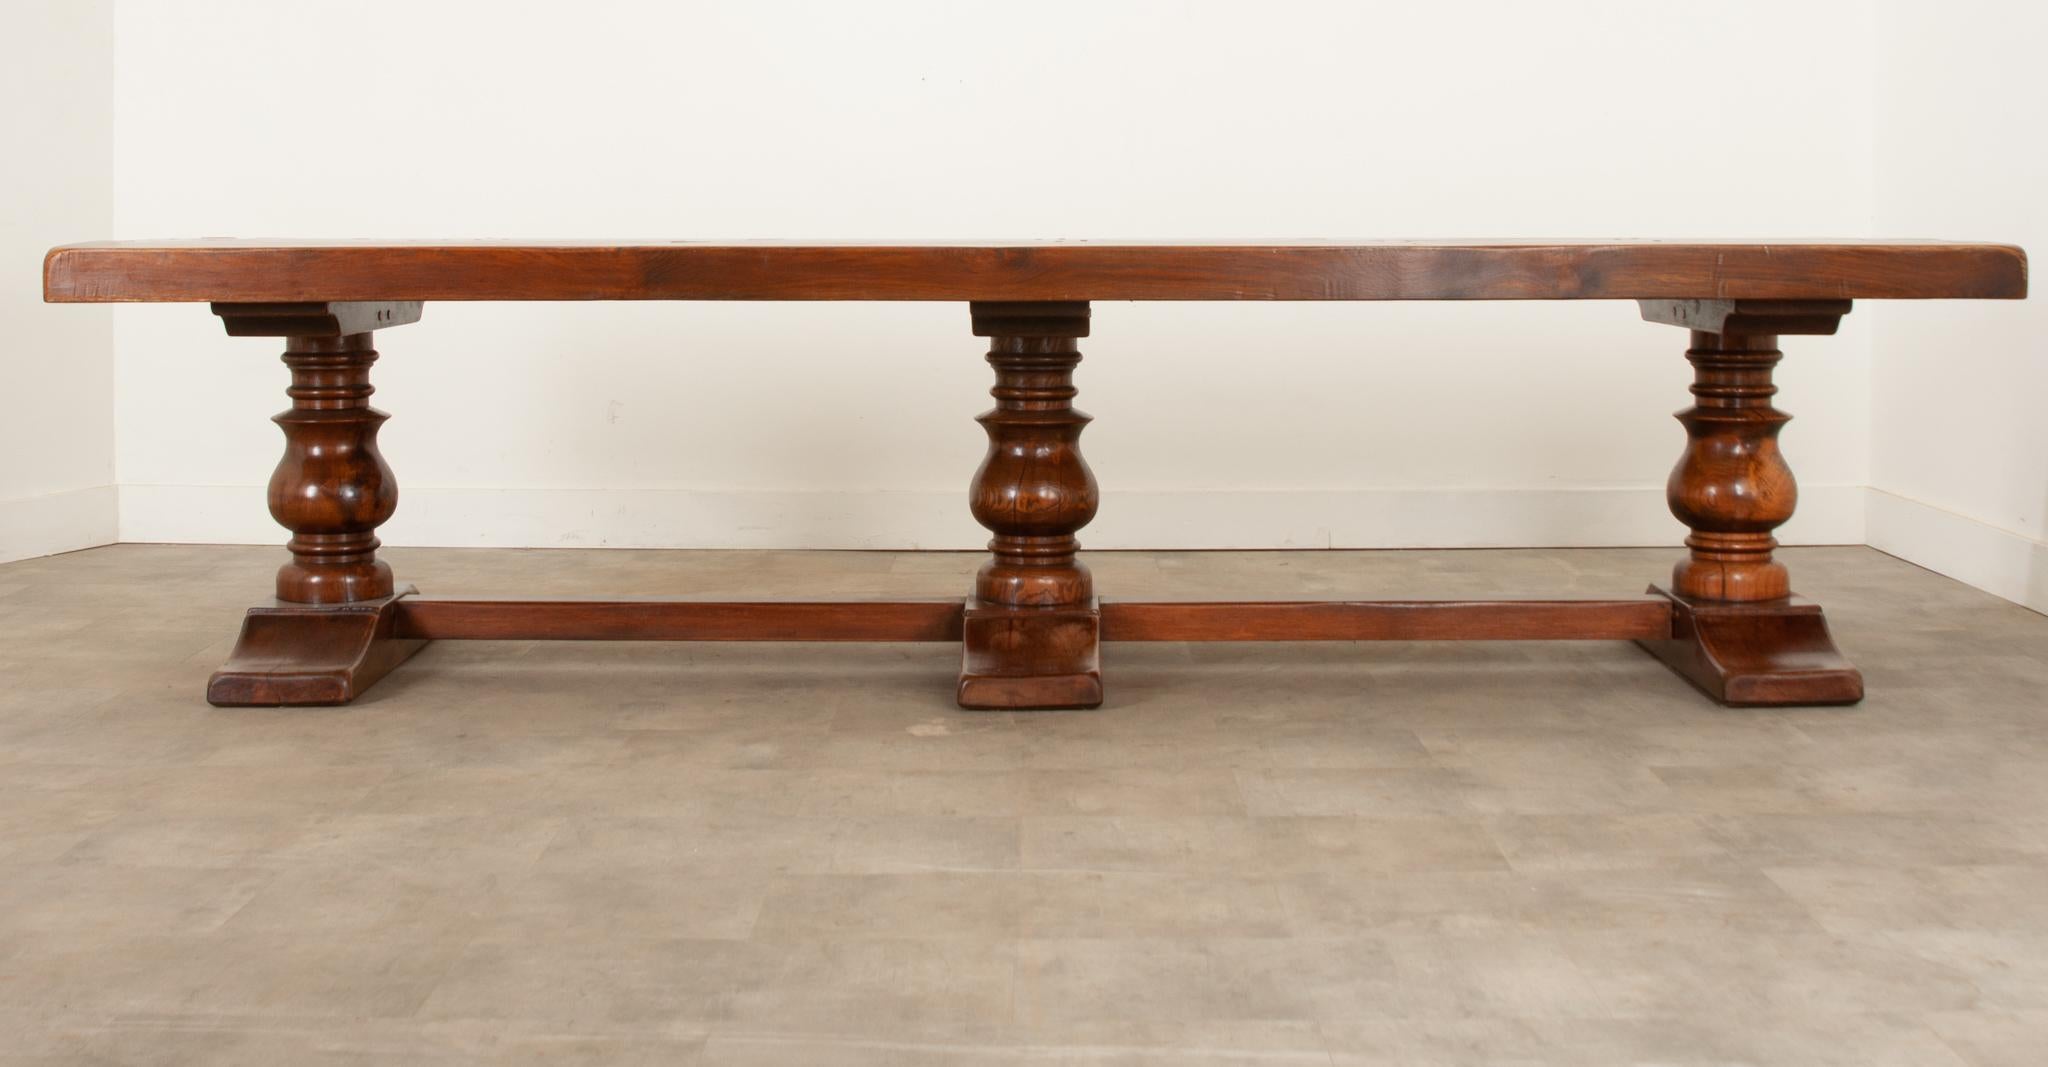 At over 10 feet long this massive French solid oak trestle base table is an absolute showstopper. Dating to the late 19th century it is a magnificent example of skilled craftsmanship. The 3 ½” thick top consists of four solid planks and is the